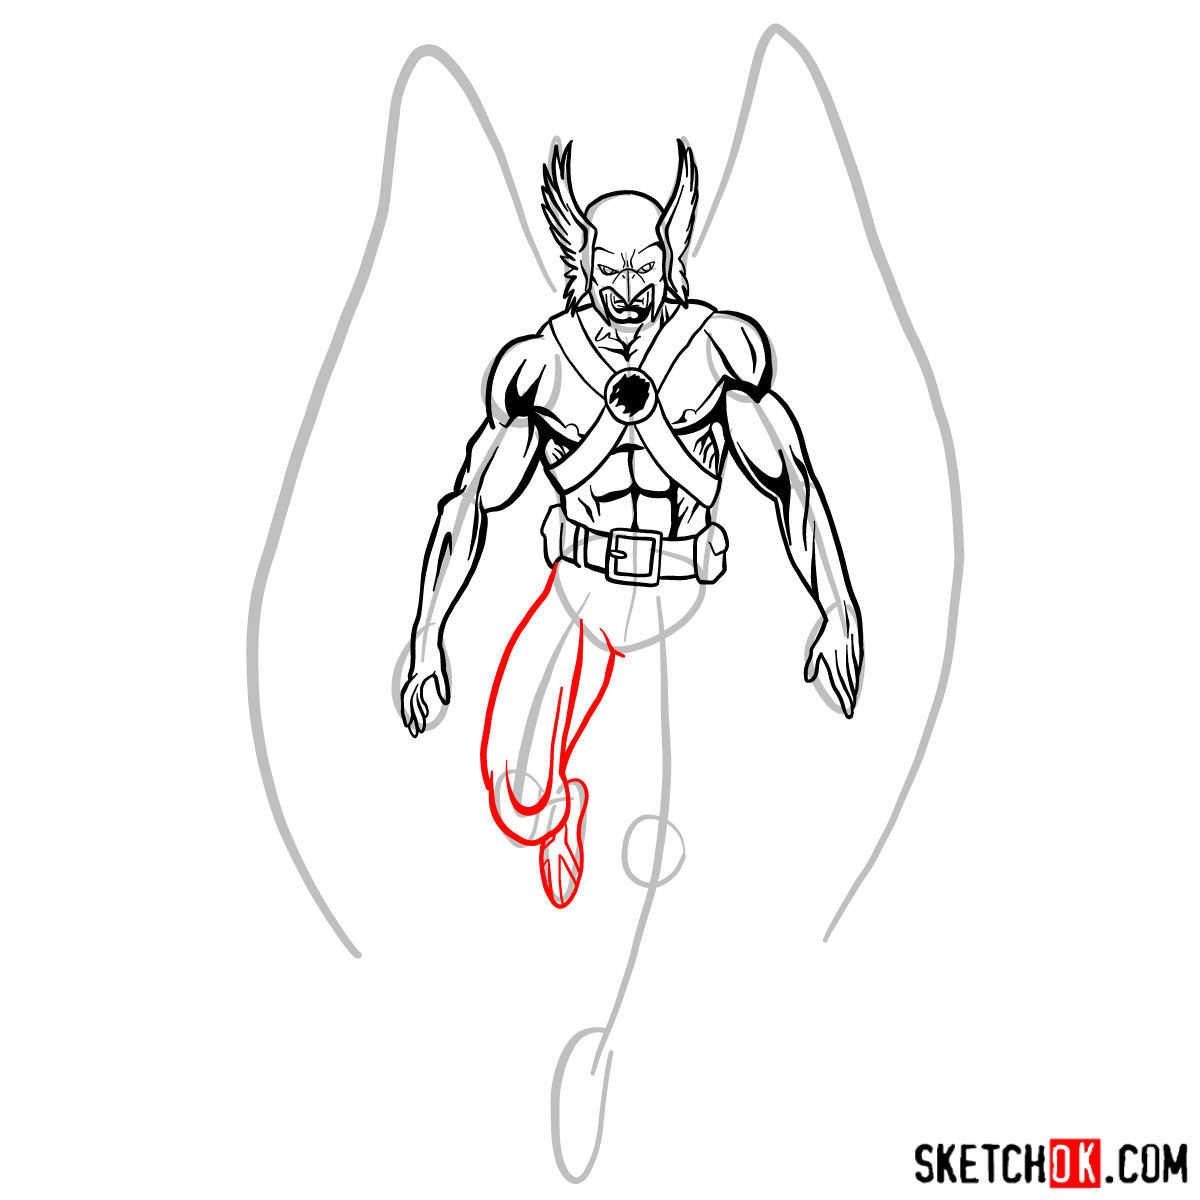 How to draw Hawkman from DC Comics - step 11